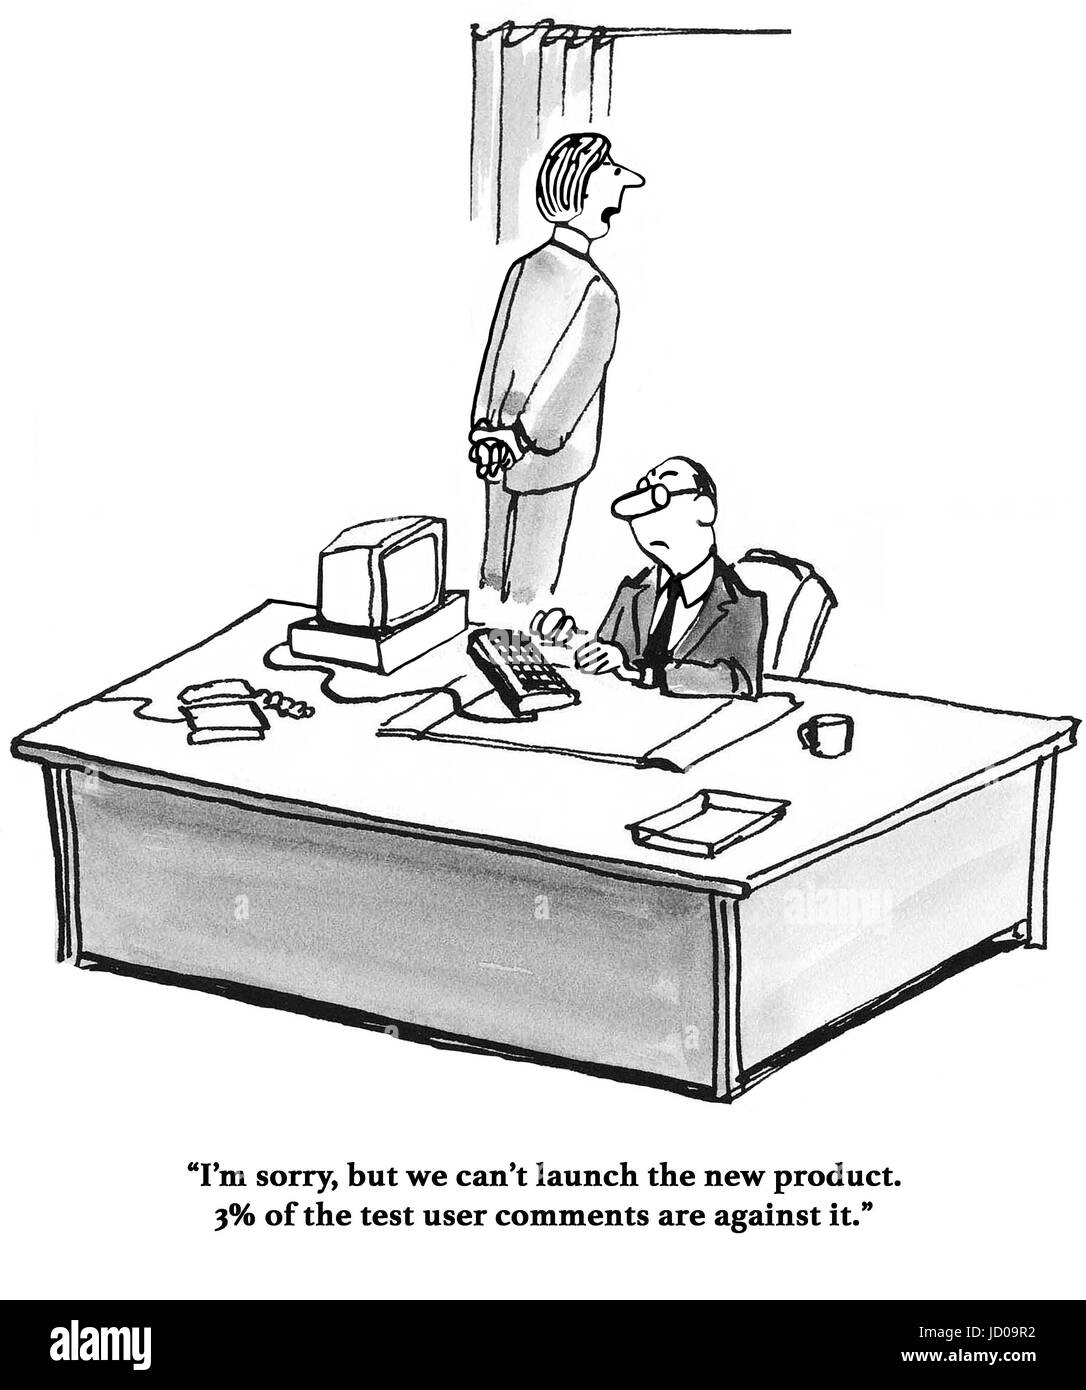 Business cartoon about not being able to launch a new product based on user responses. Stock Photo